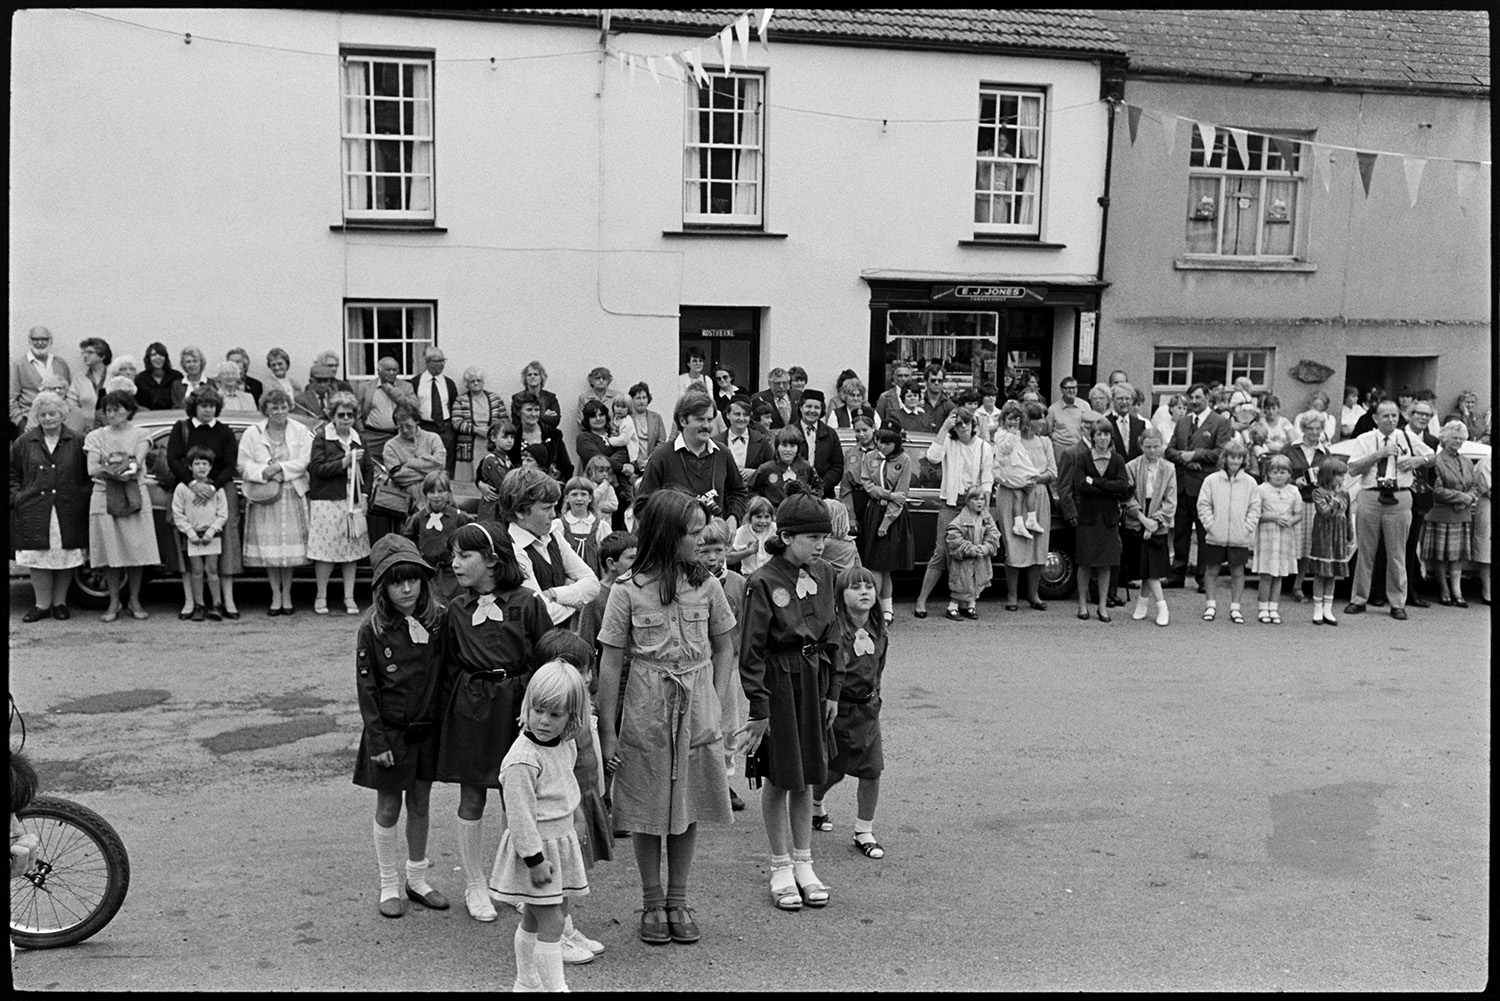 Fair Queen and attendants in village square, spectators waiting around. Photographer. 
[A group of Brownies in Winkleigh village square at Winkleigh Fair. A crowd of people are watching in the background and the street is decorated with bunting.]